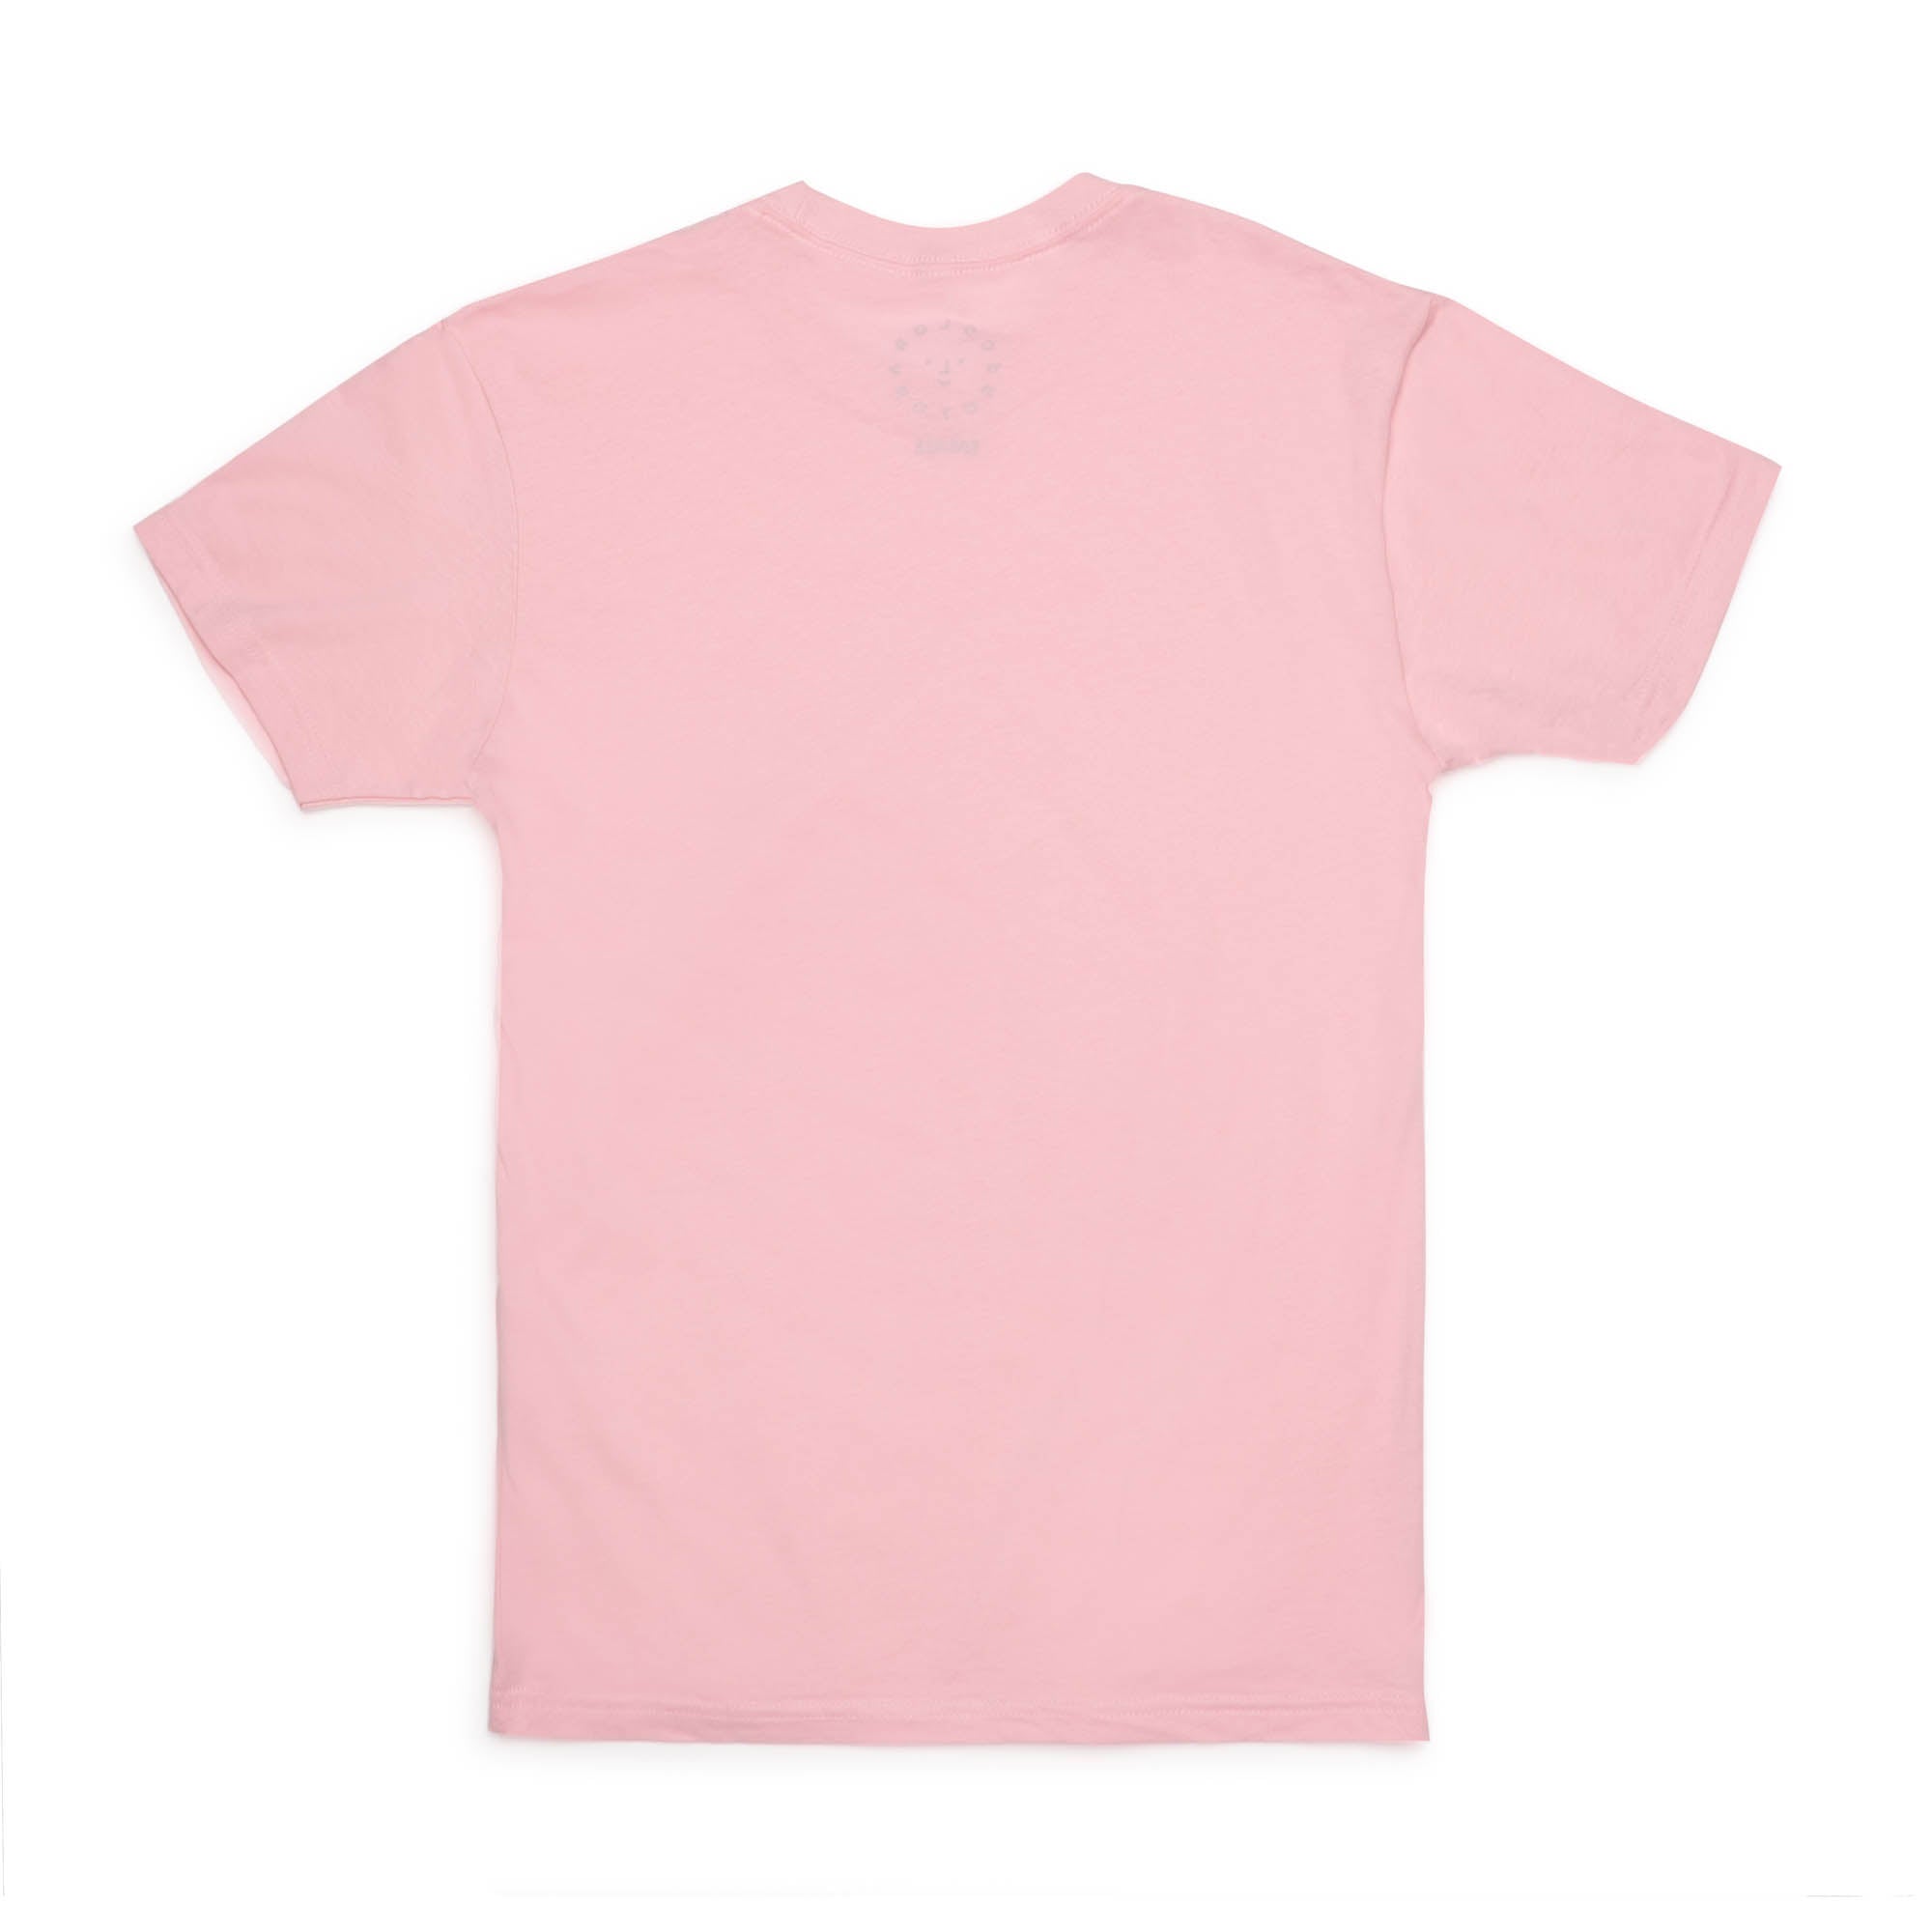 T-shirts 2 pack Color pink - SINSAY - 6112R-30X